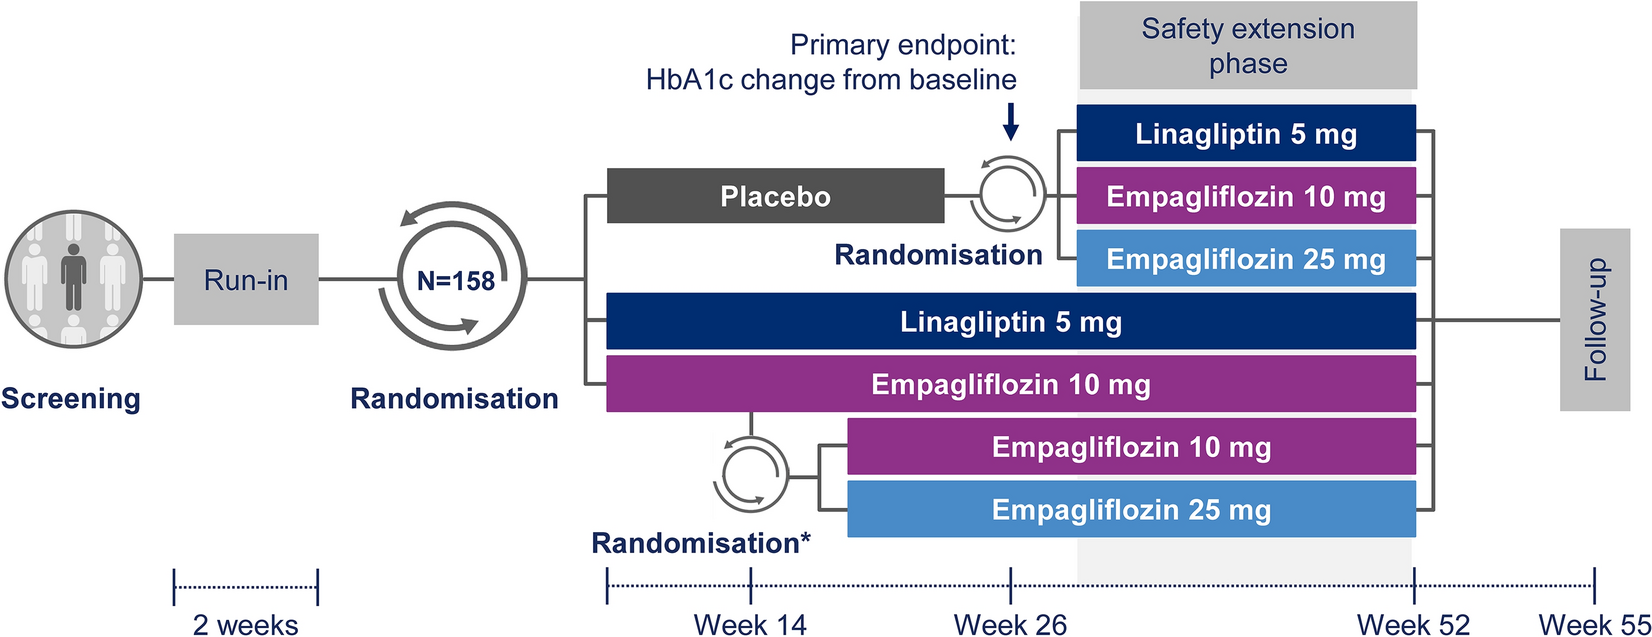 Summary of Research: Efficacy and Safety of the SGLT2 Inhibitor Empagliflozin Versus Placebo and the DPP-4 Inhibitor Linagliptin Versus Placebo in Young People with Type 2 Diabetes (DINAMO): A Multicentre, Randomised, Double-Blind, Parallel Group, Phase 3 Trial